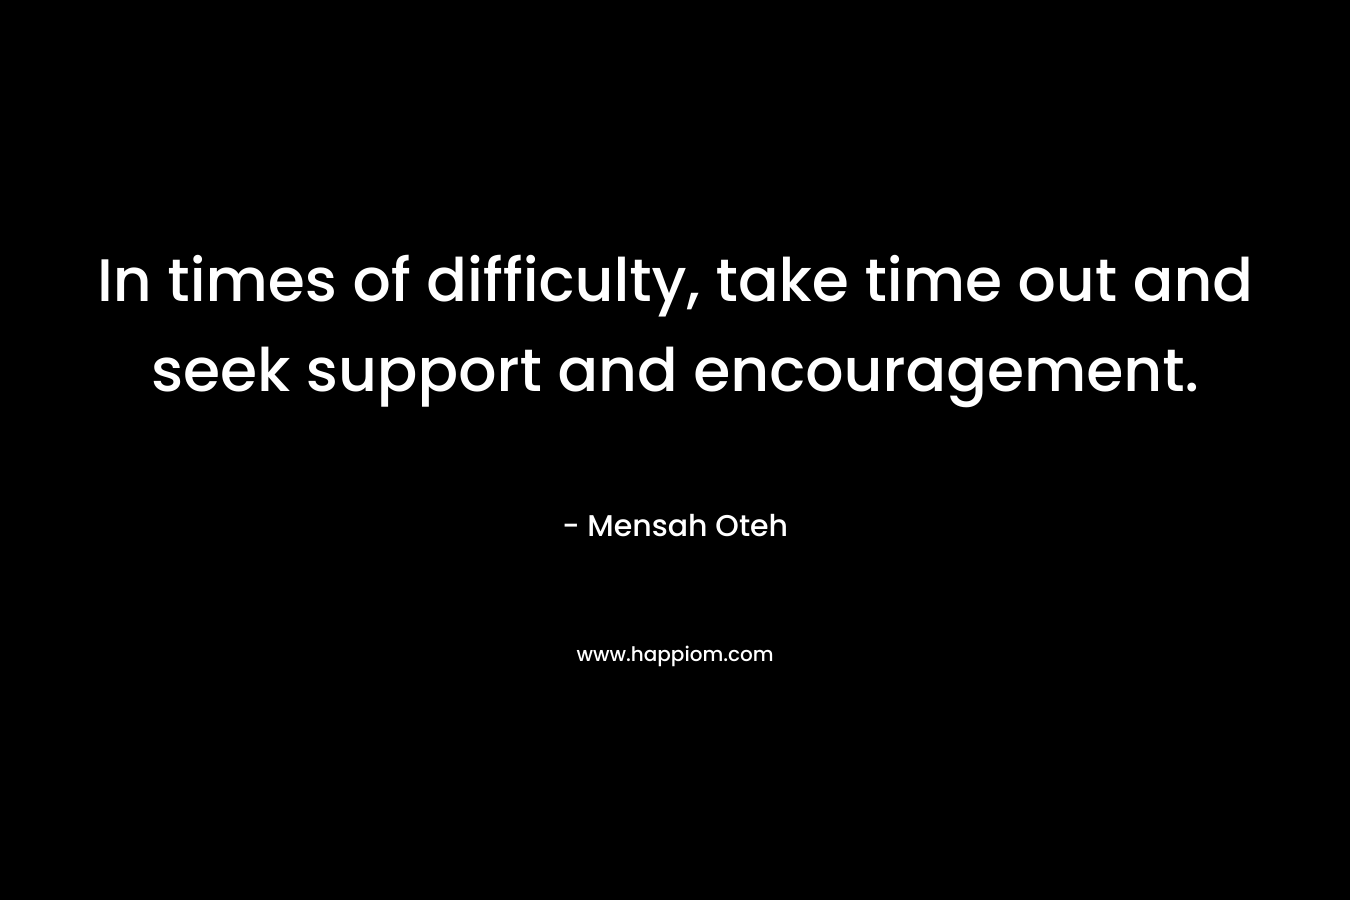 In times of difficulty, take time out and seek support and encouragement.